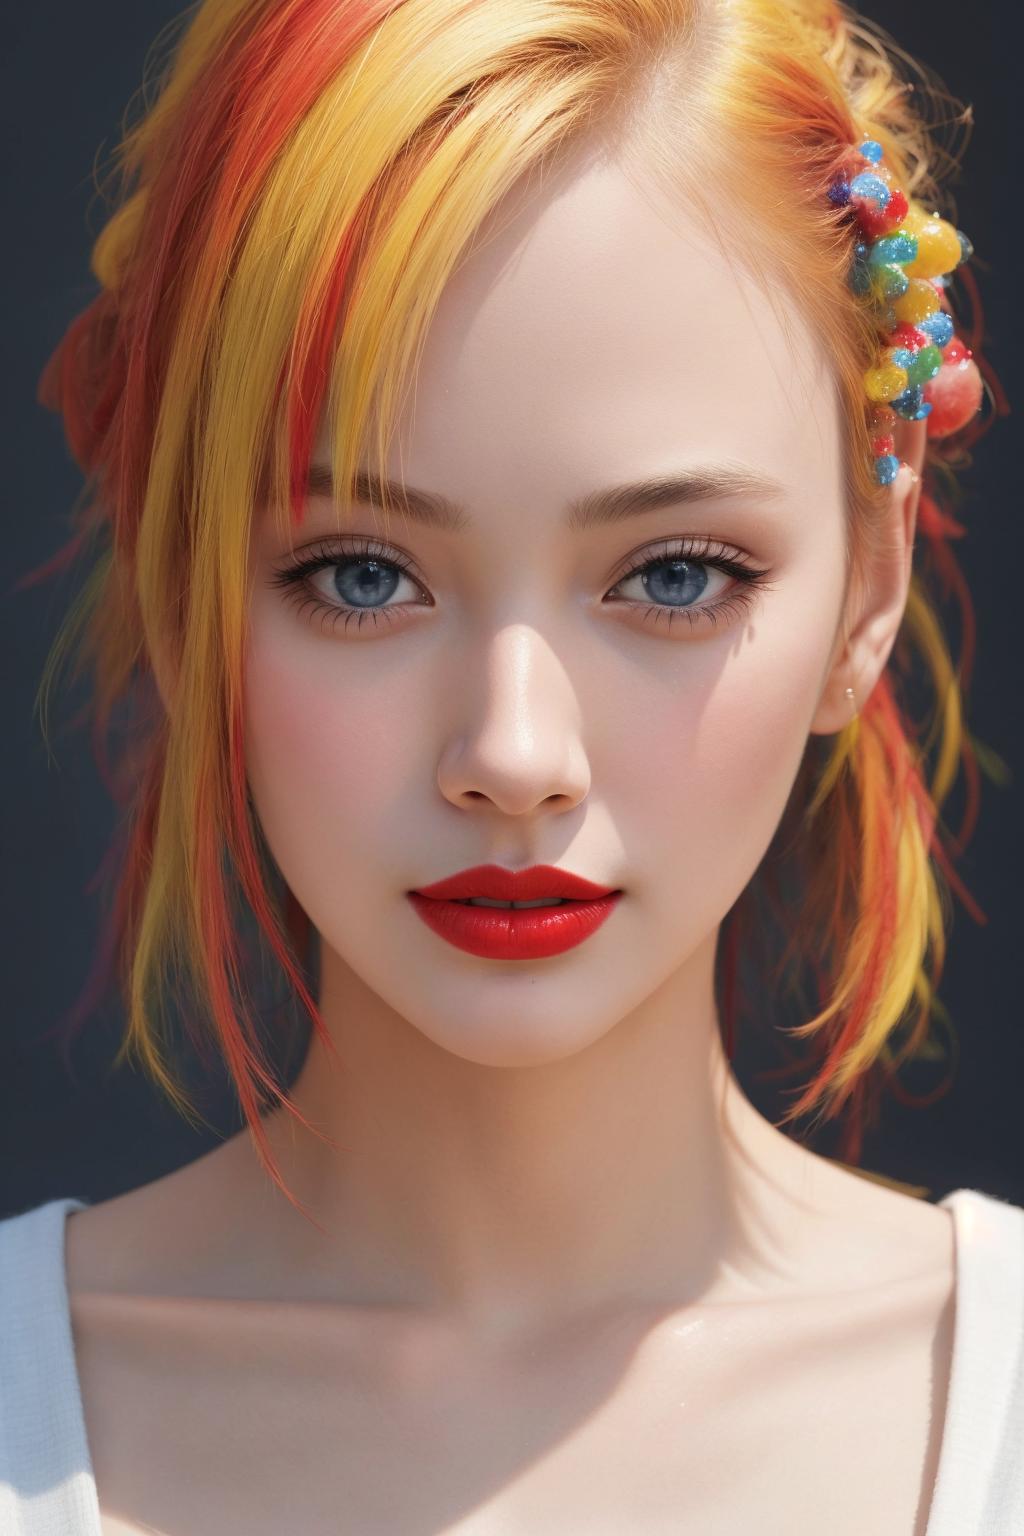 A woman with yellow and red hair wearing a white shirt and red lipstick.